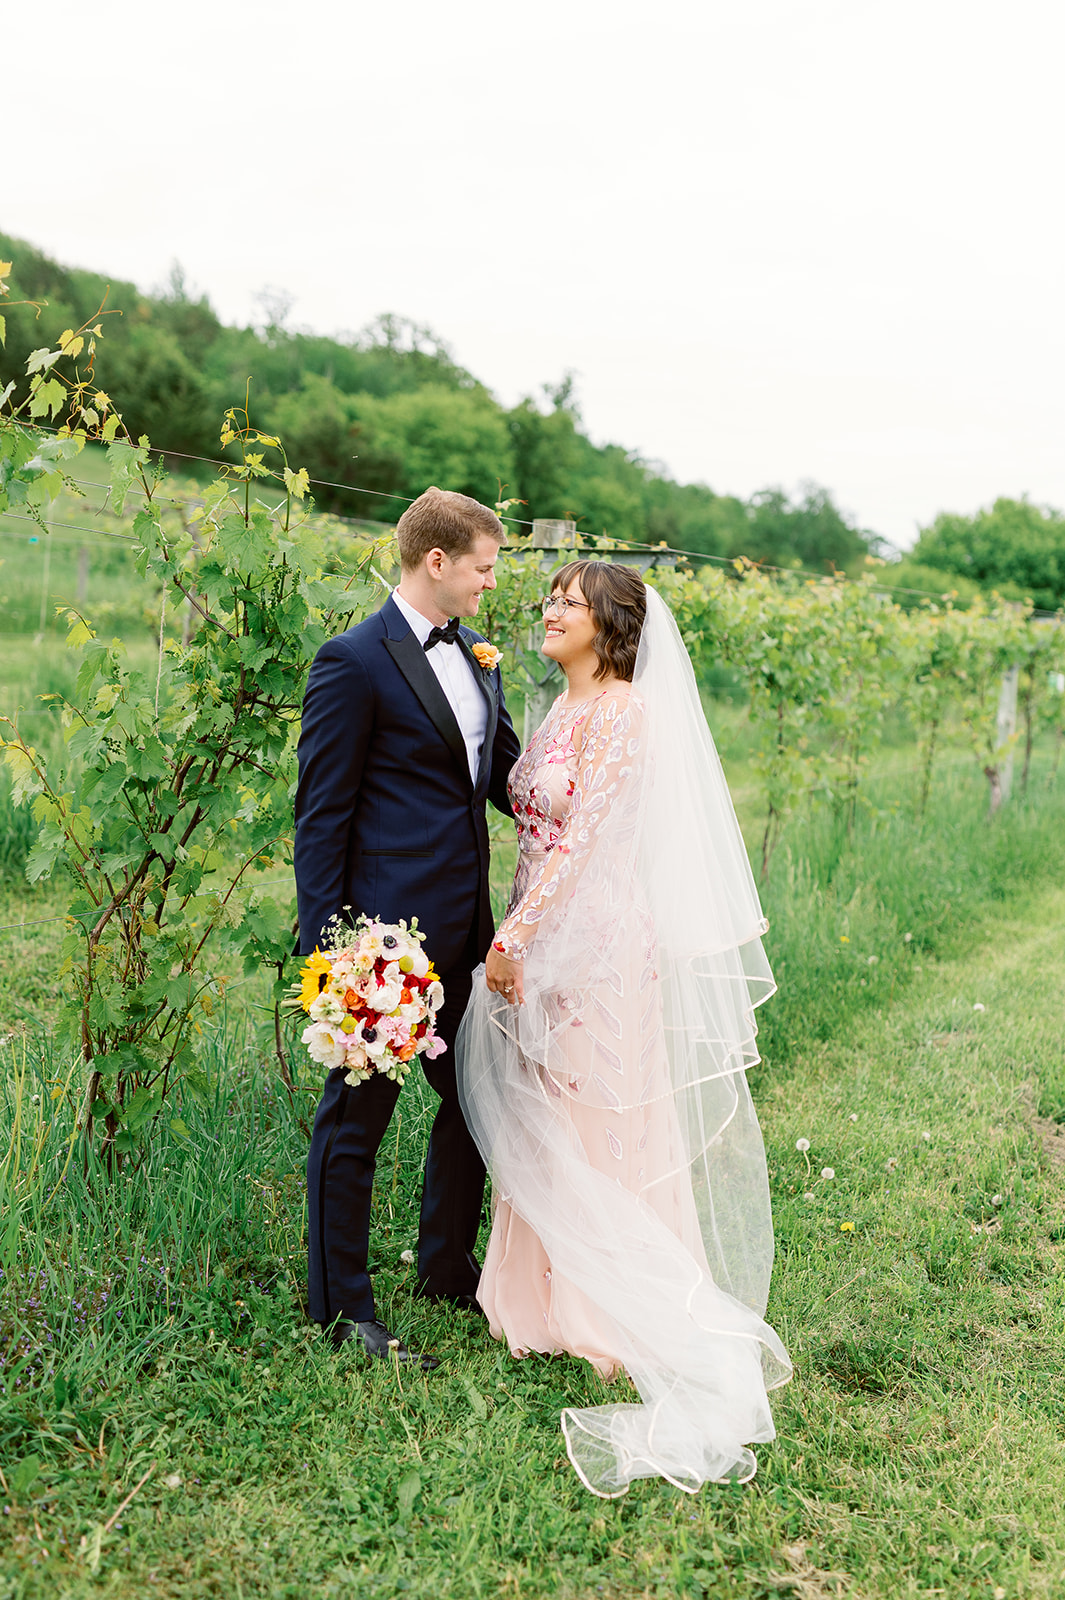 Newlyweds stand among grape vines while hugging in a pink gown and blue suit